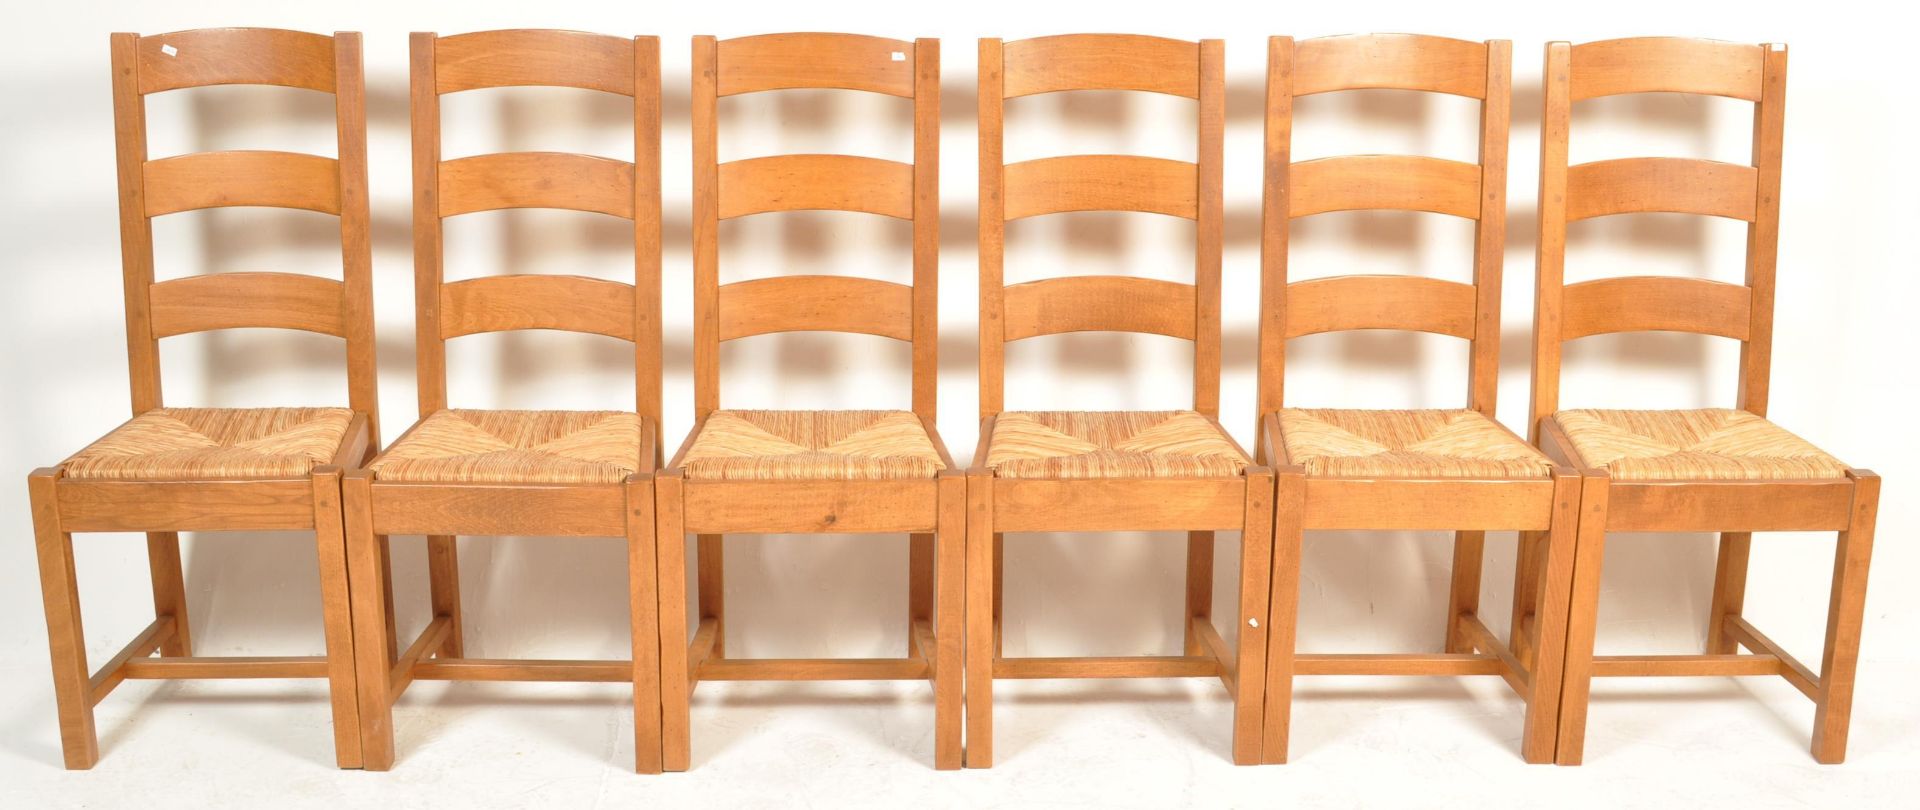 SET OF SIX FRENCH REVIVAL BEECH AND ELM LADDERBACK DINING CHAIRS - Image 2 of 8